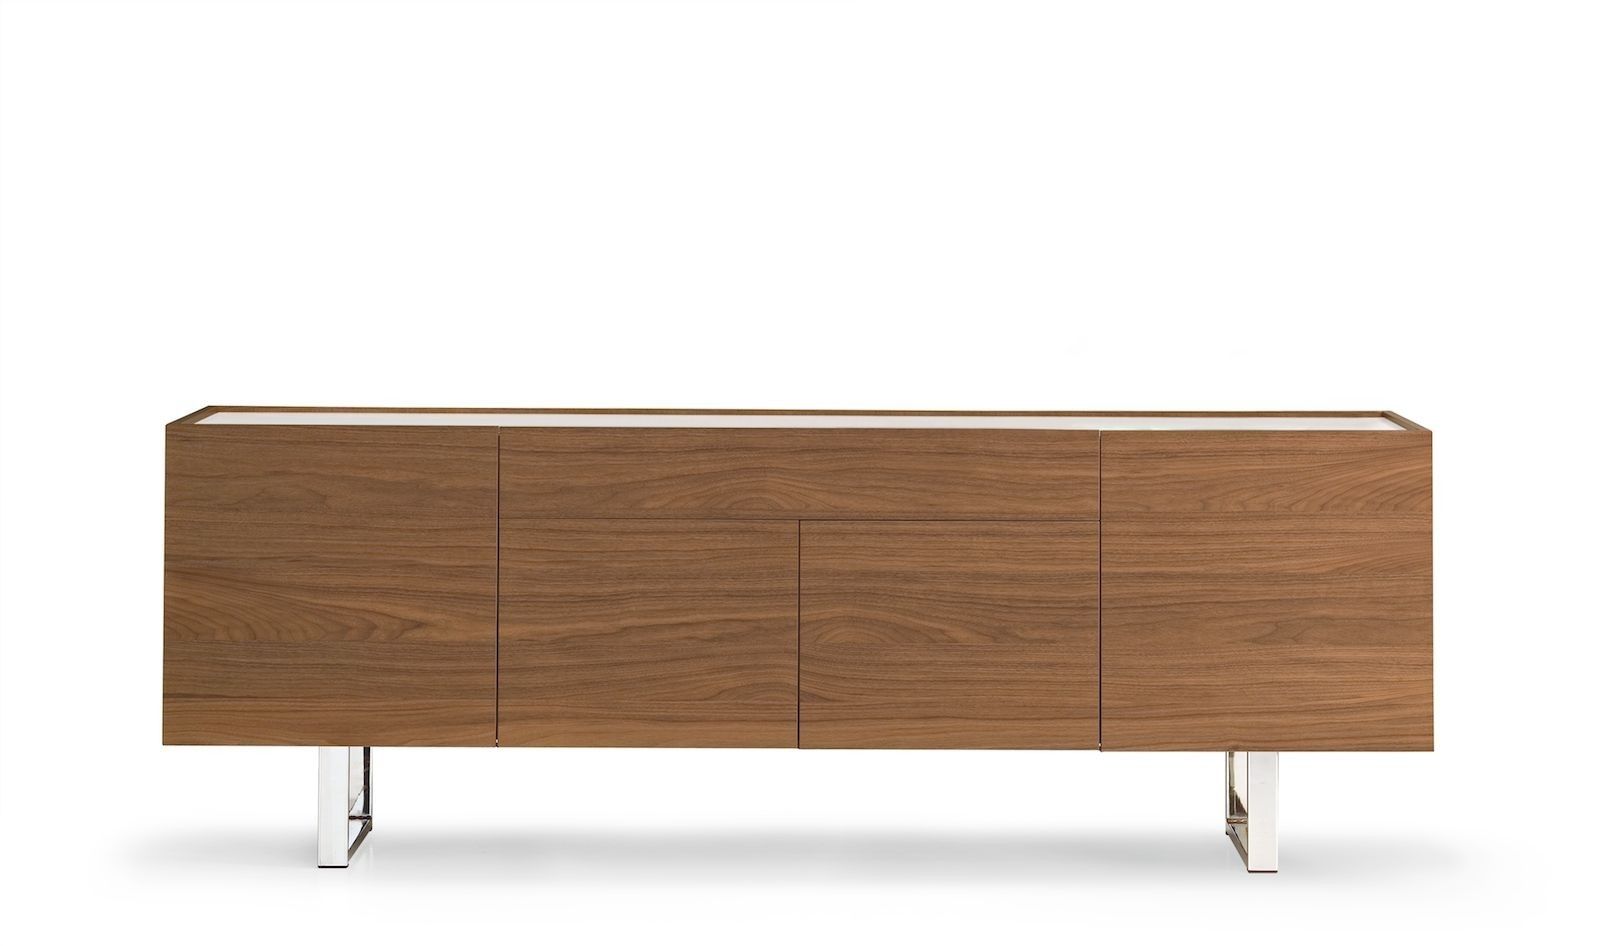 Calligaris Horizon 4 Door With Central Drawer Sideboard – Frank Mc Gowan Intended For Recent 4 Door/4 Drawer Metal Inserts Sideboards (View 18 of 20)